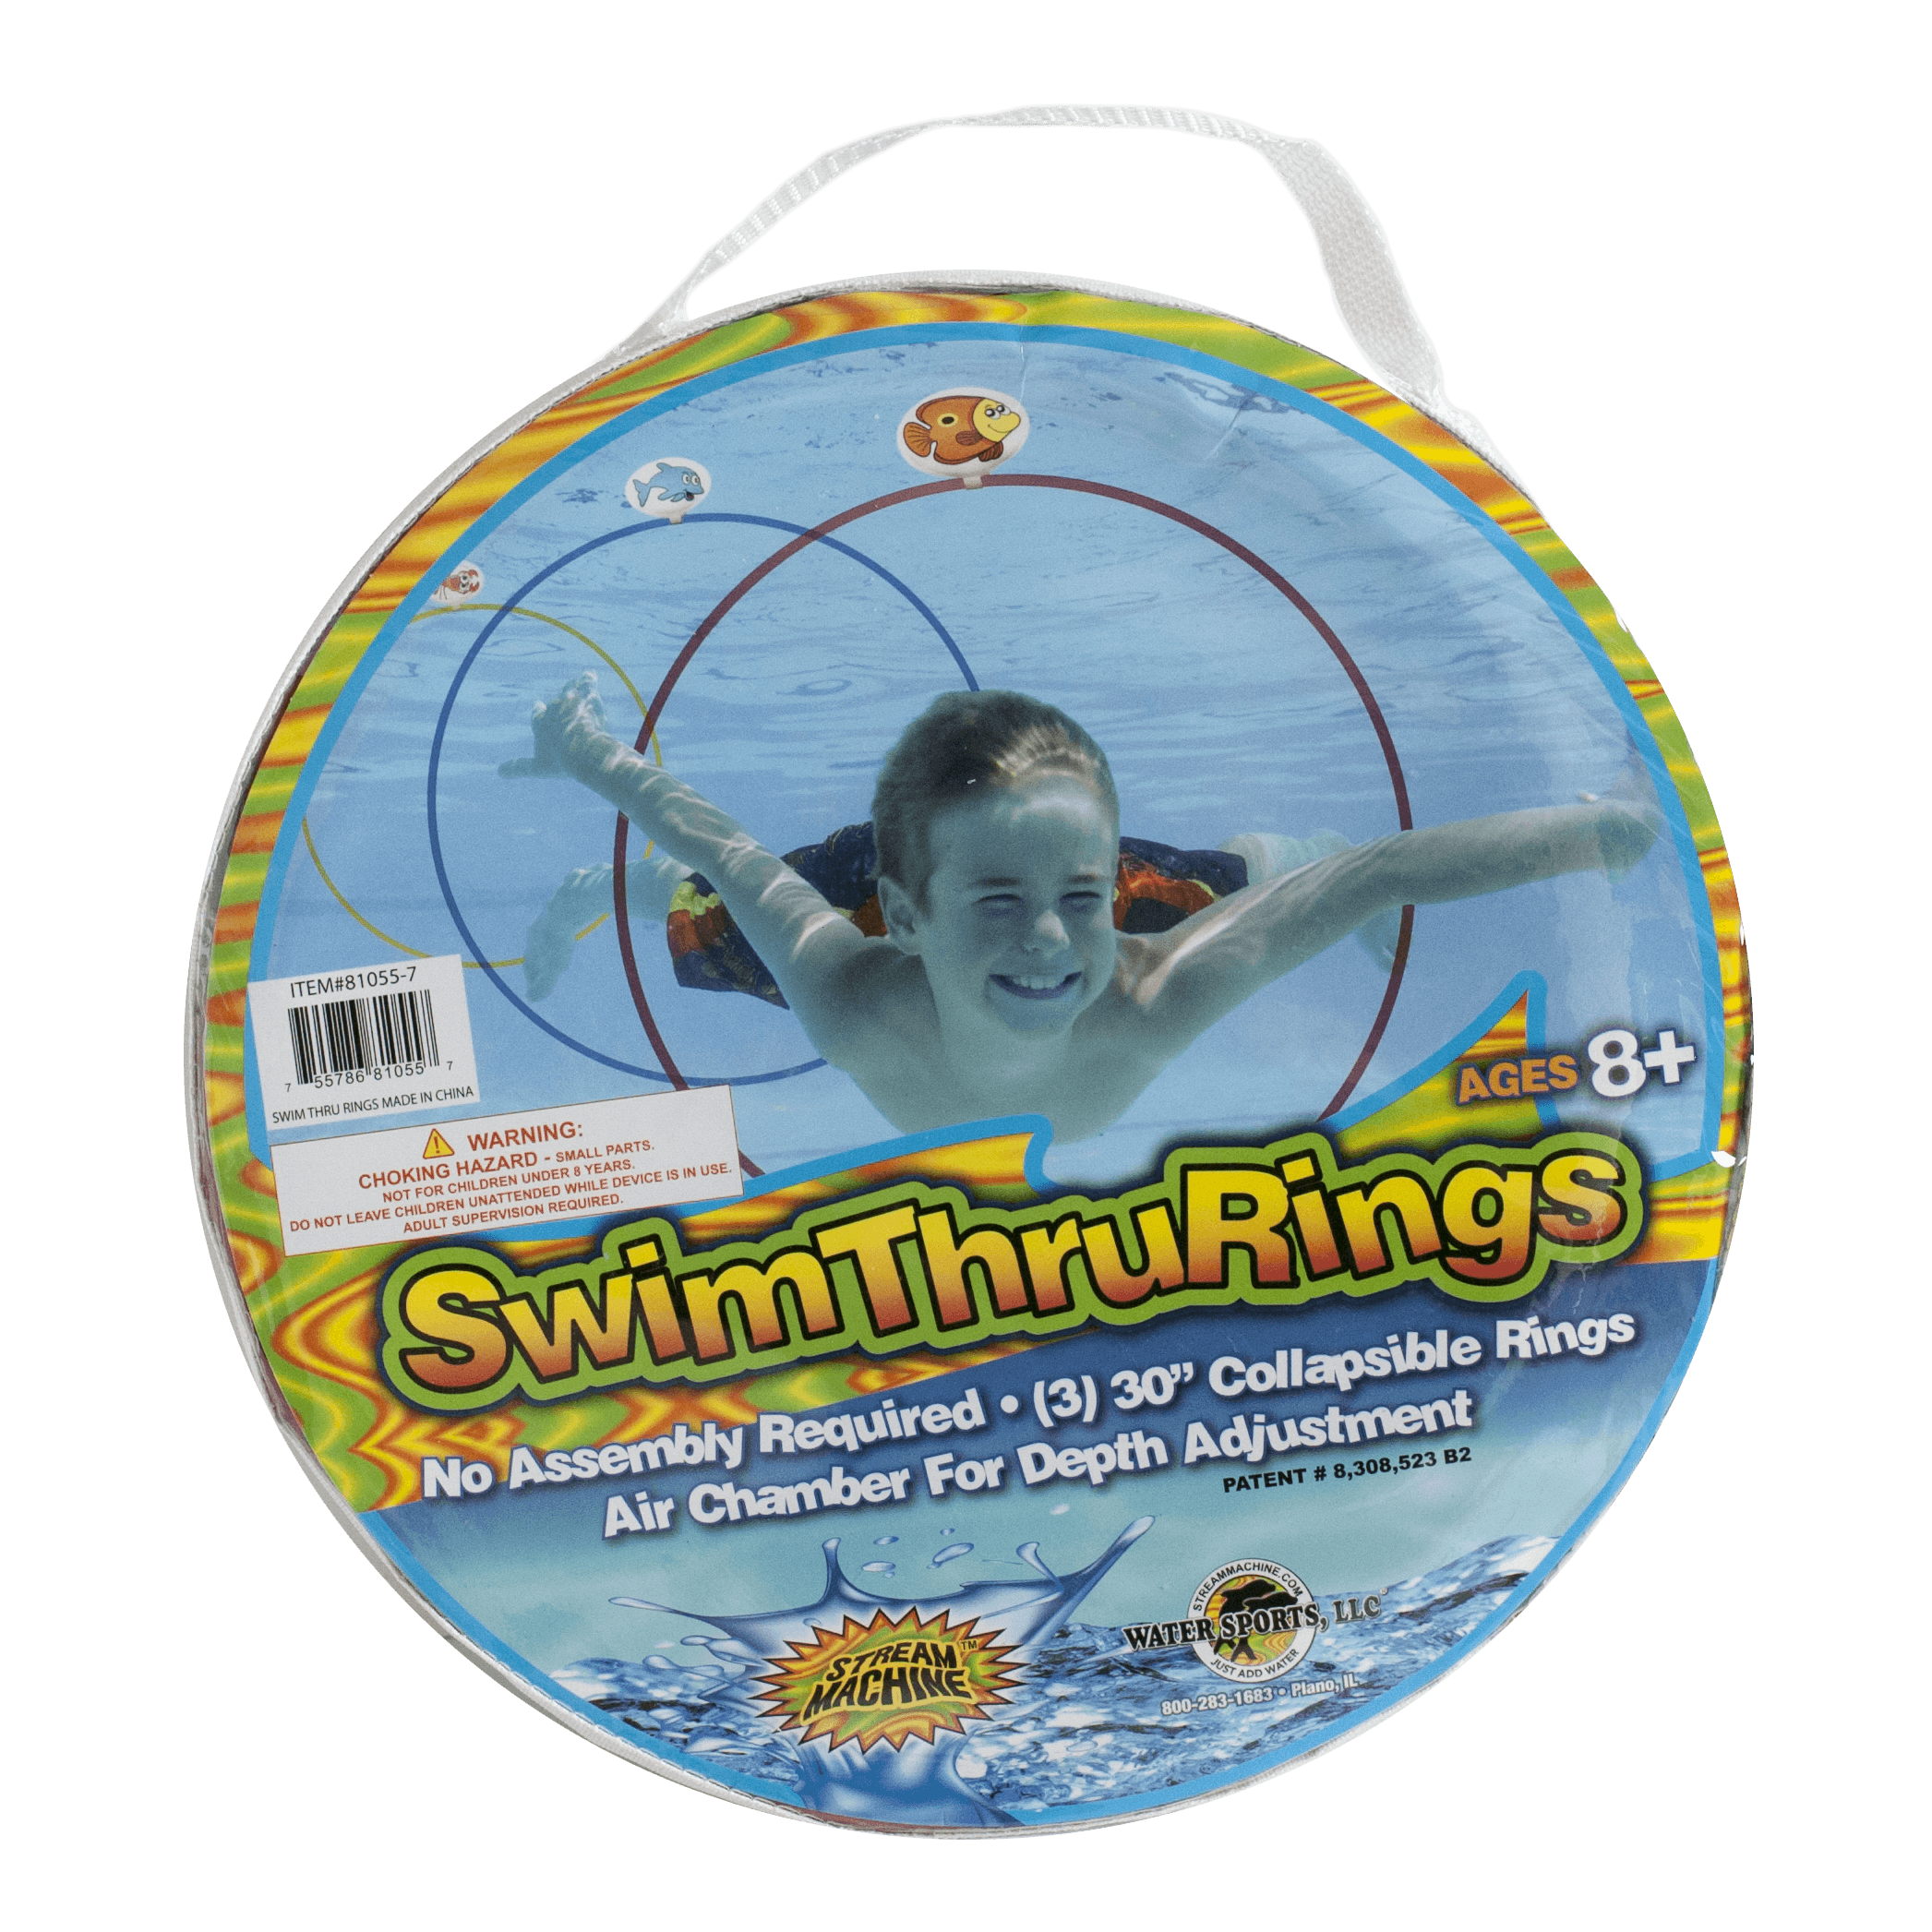 Water Sports Swim Thru Rings, Pool Toys, Children 8+ years (Colors Vary) - image 1 of 6